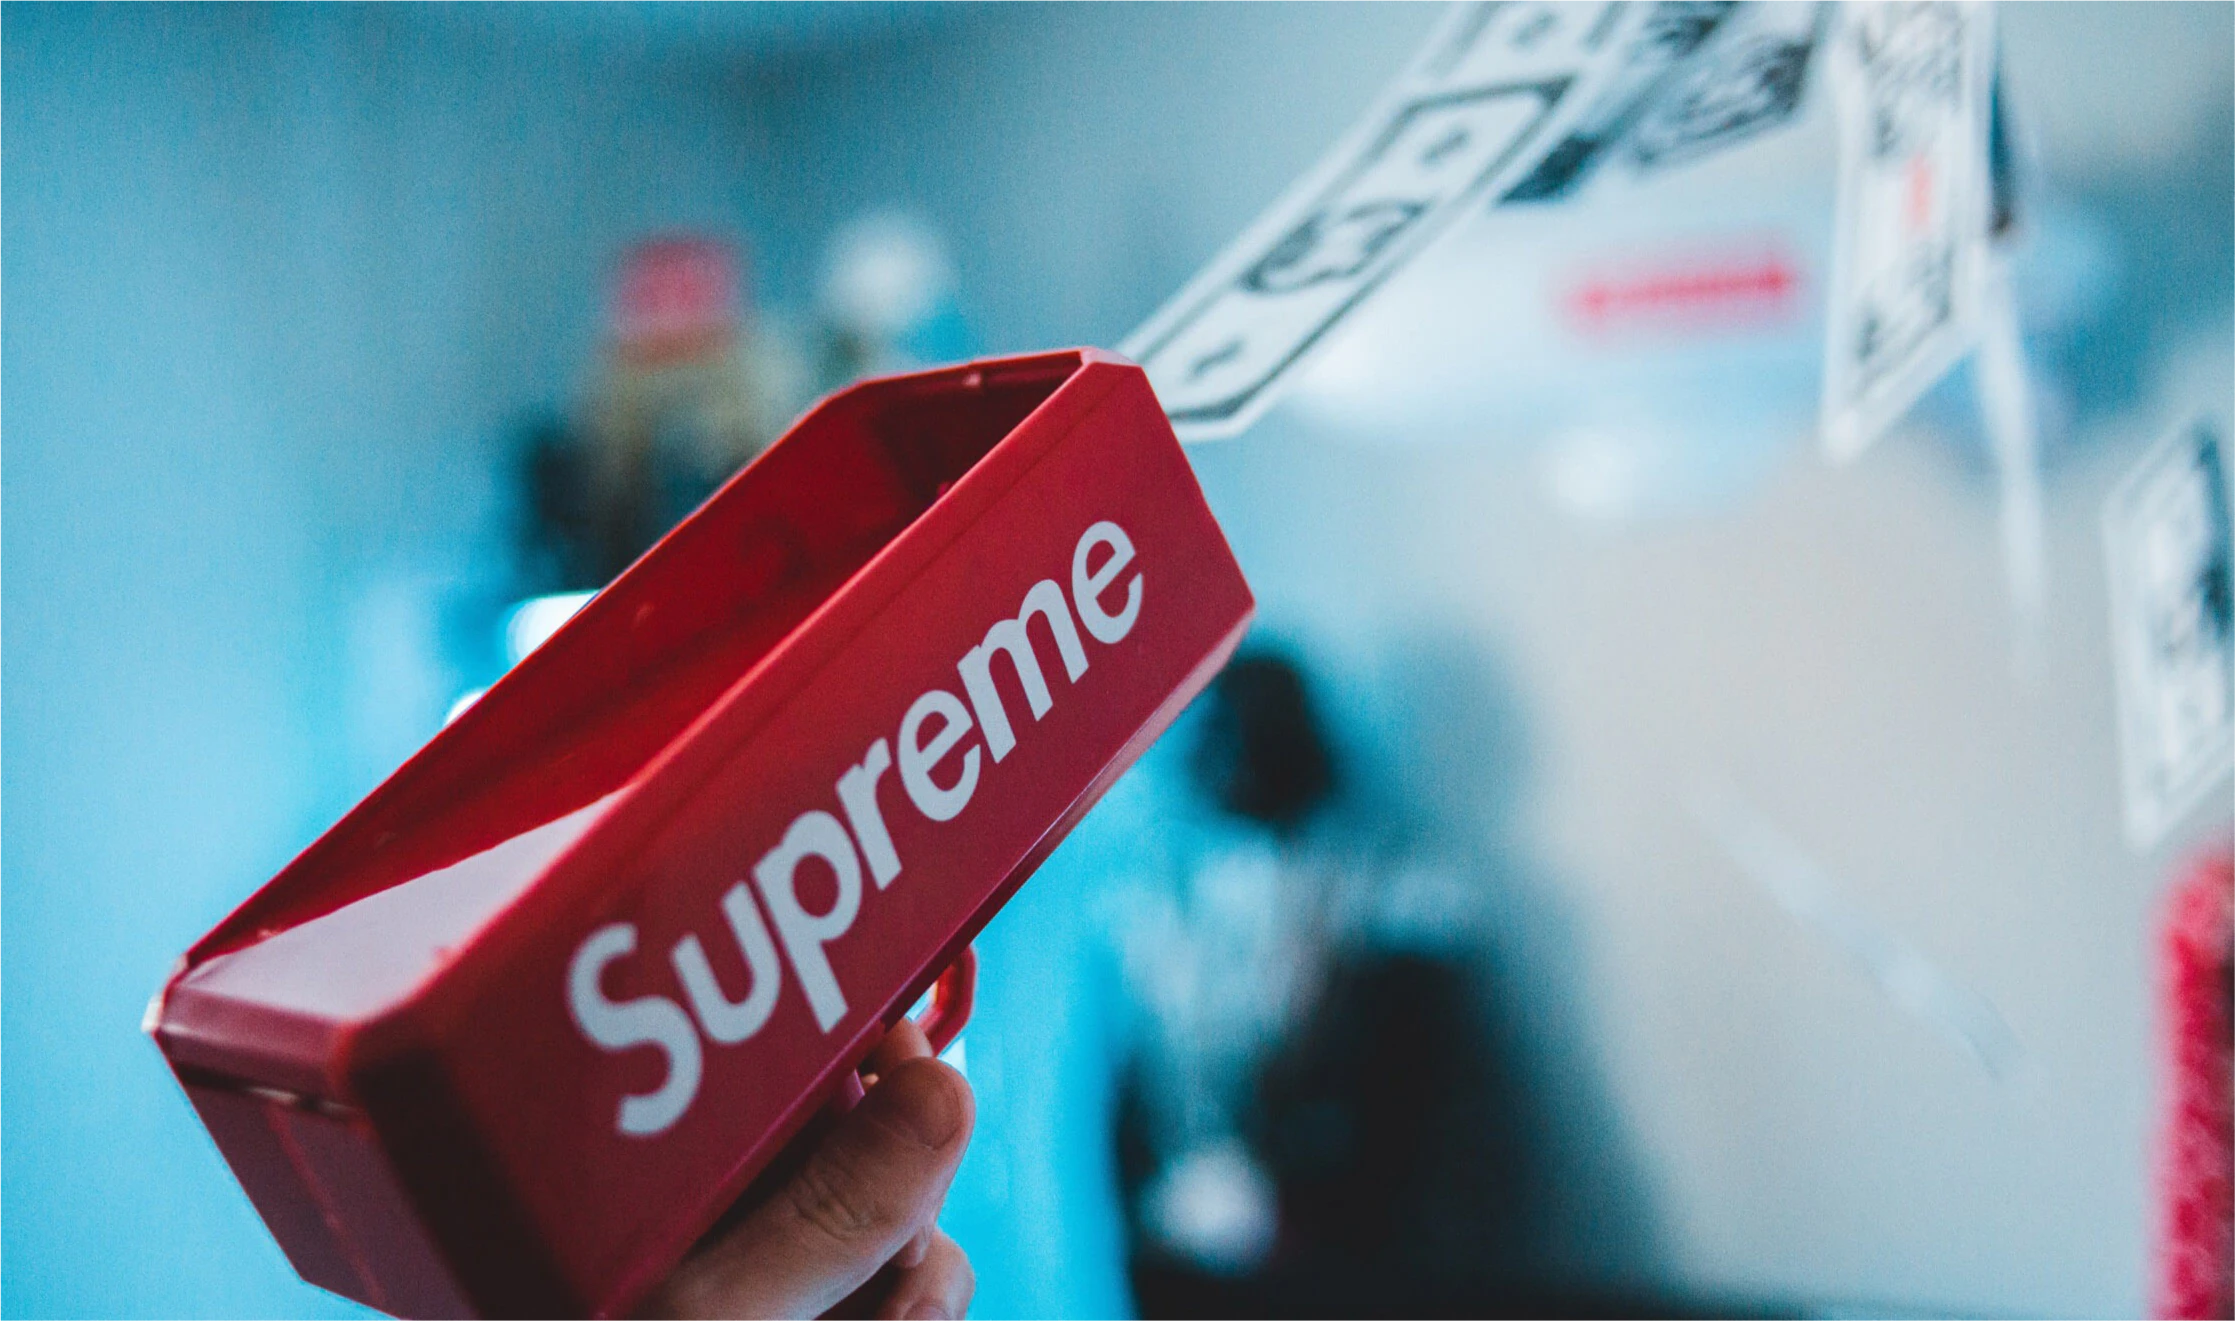 The Supreme Effect: What the streetwear giant can teach all businesses  about brand experience - Baal & Spots